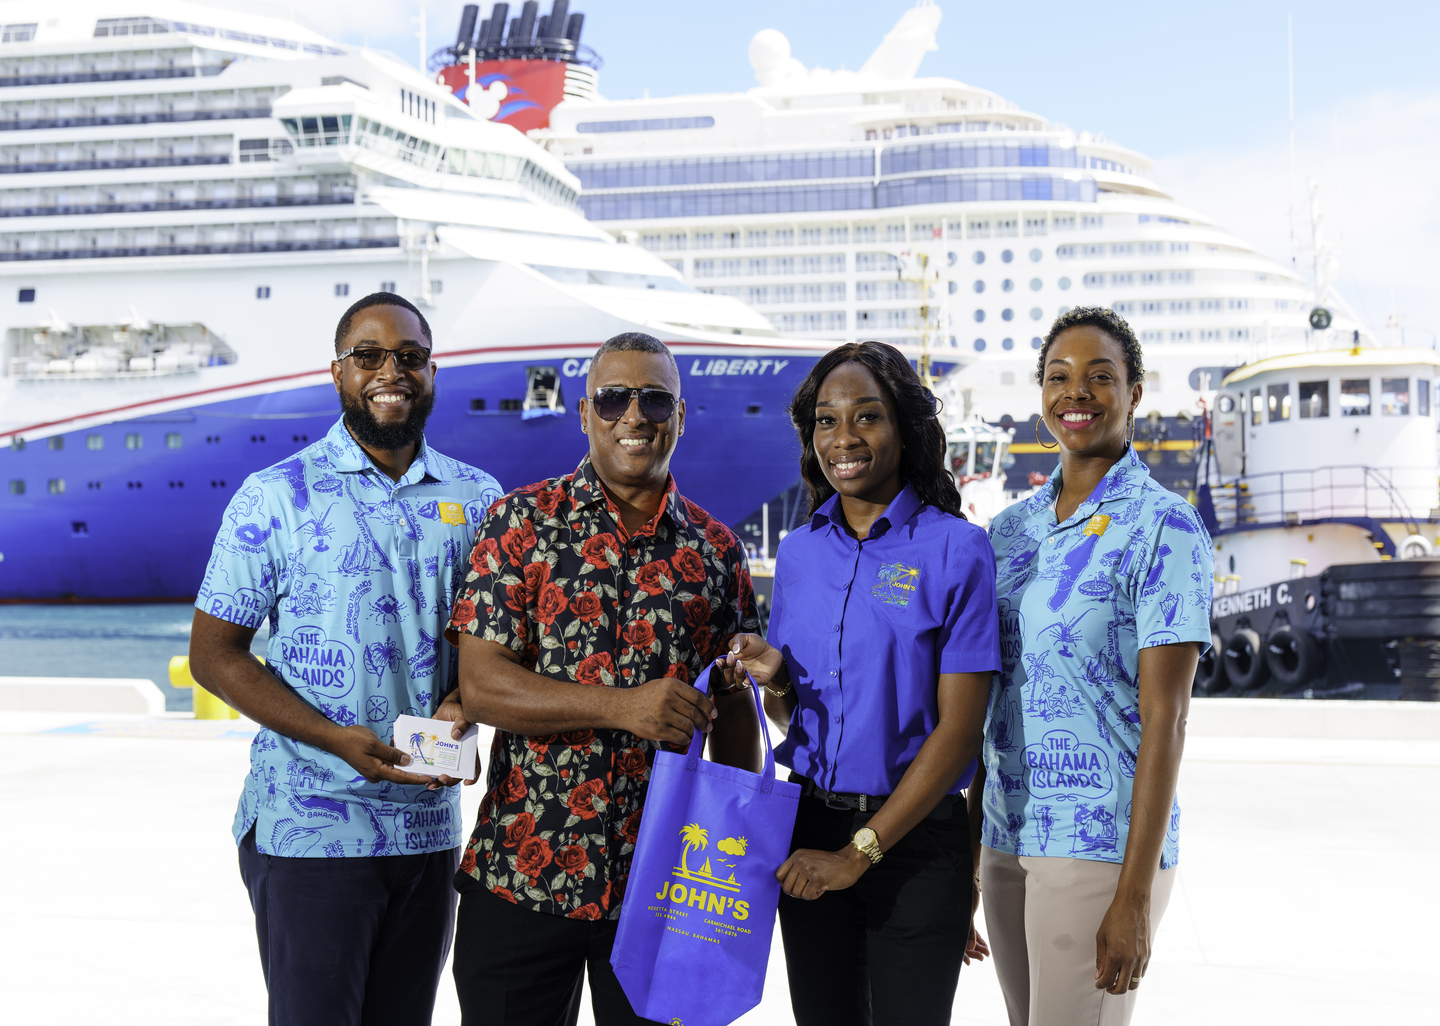 Nassau Cruise Port Ltd. Supports Local Community with Back-to-School Donation to Mt. Olive Baptist Church